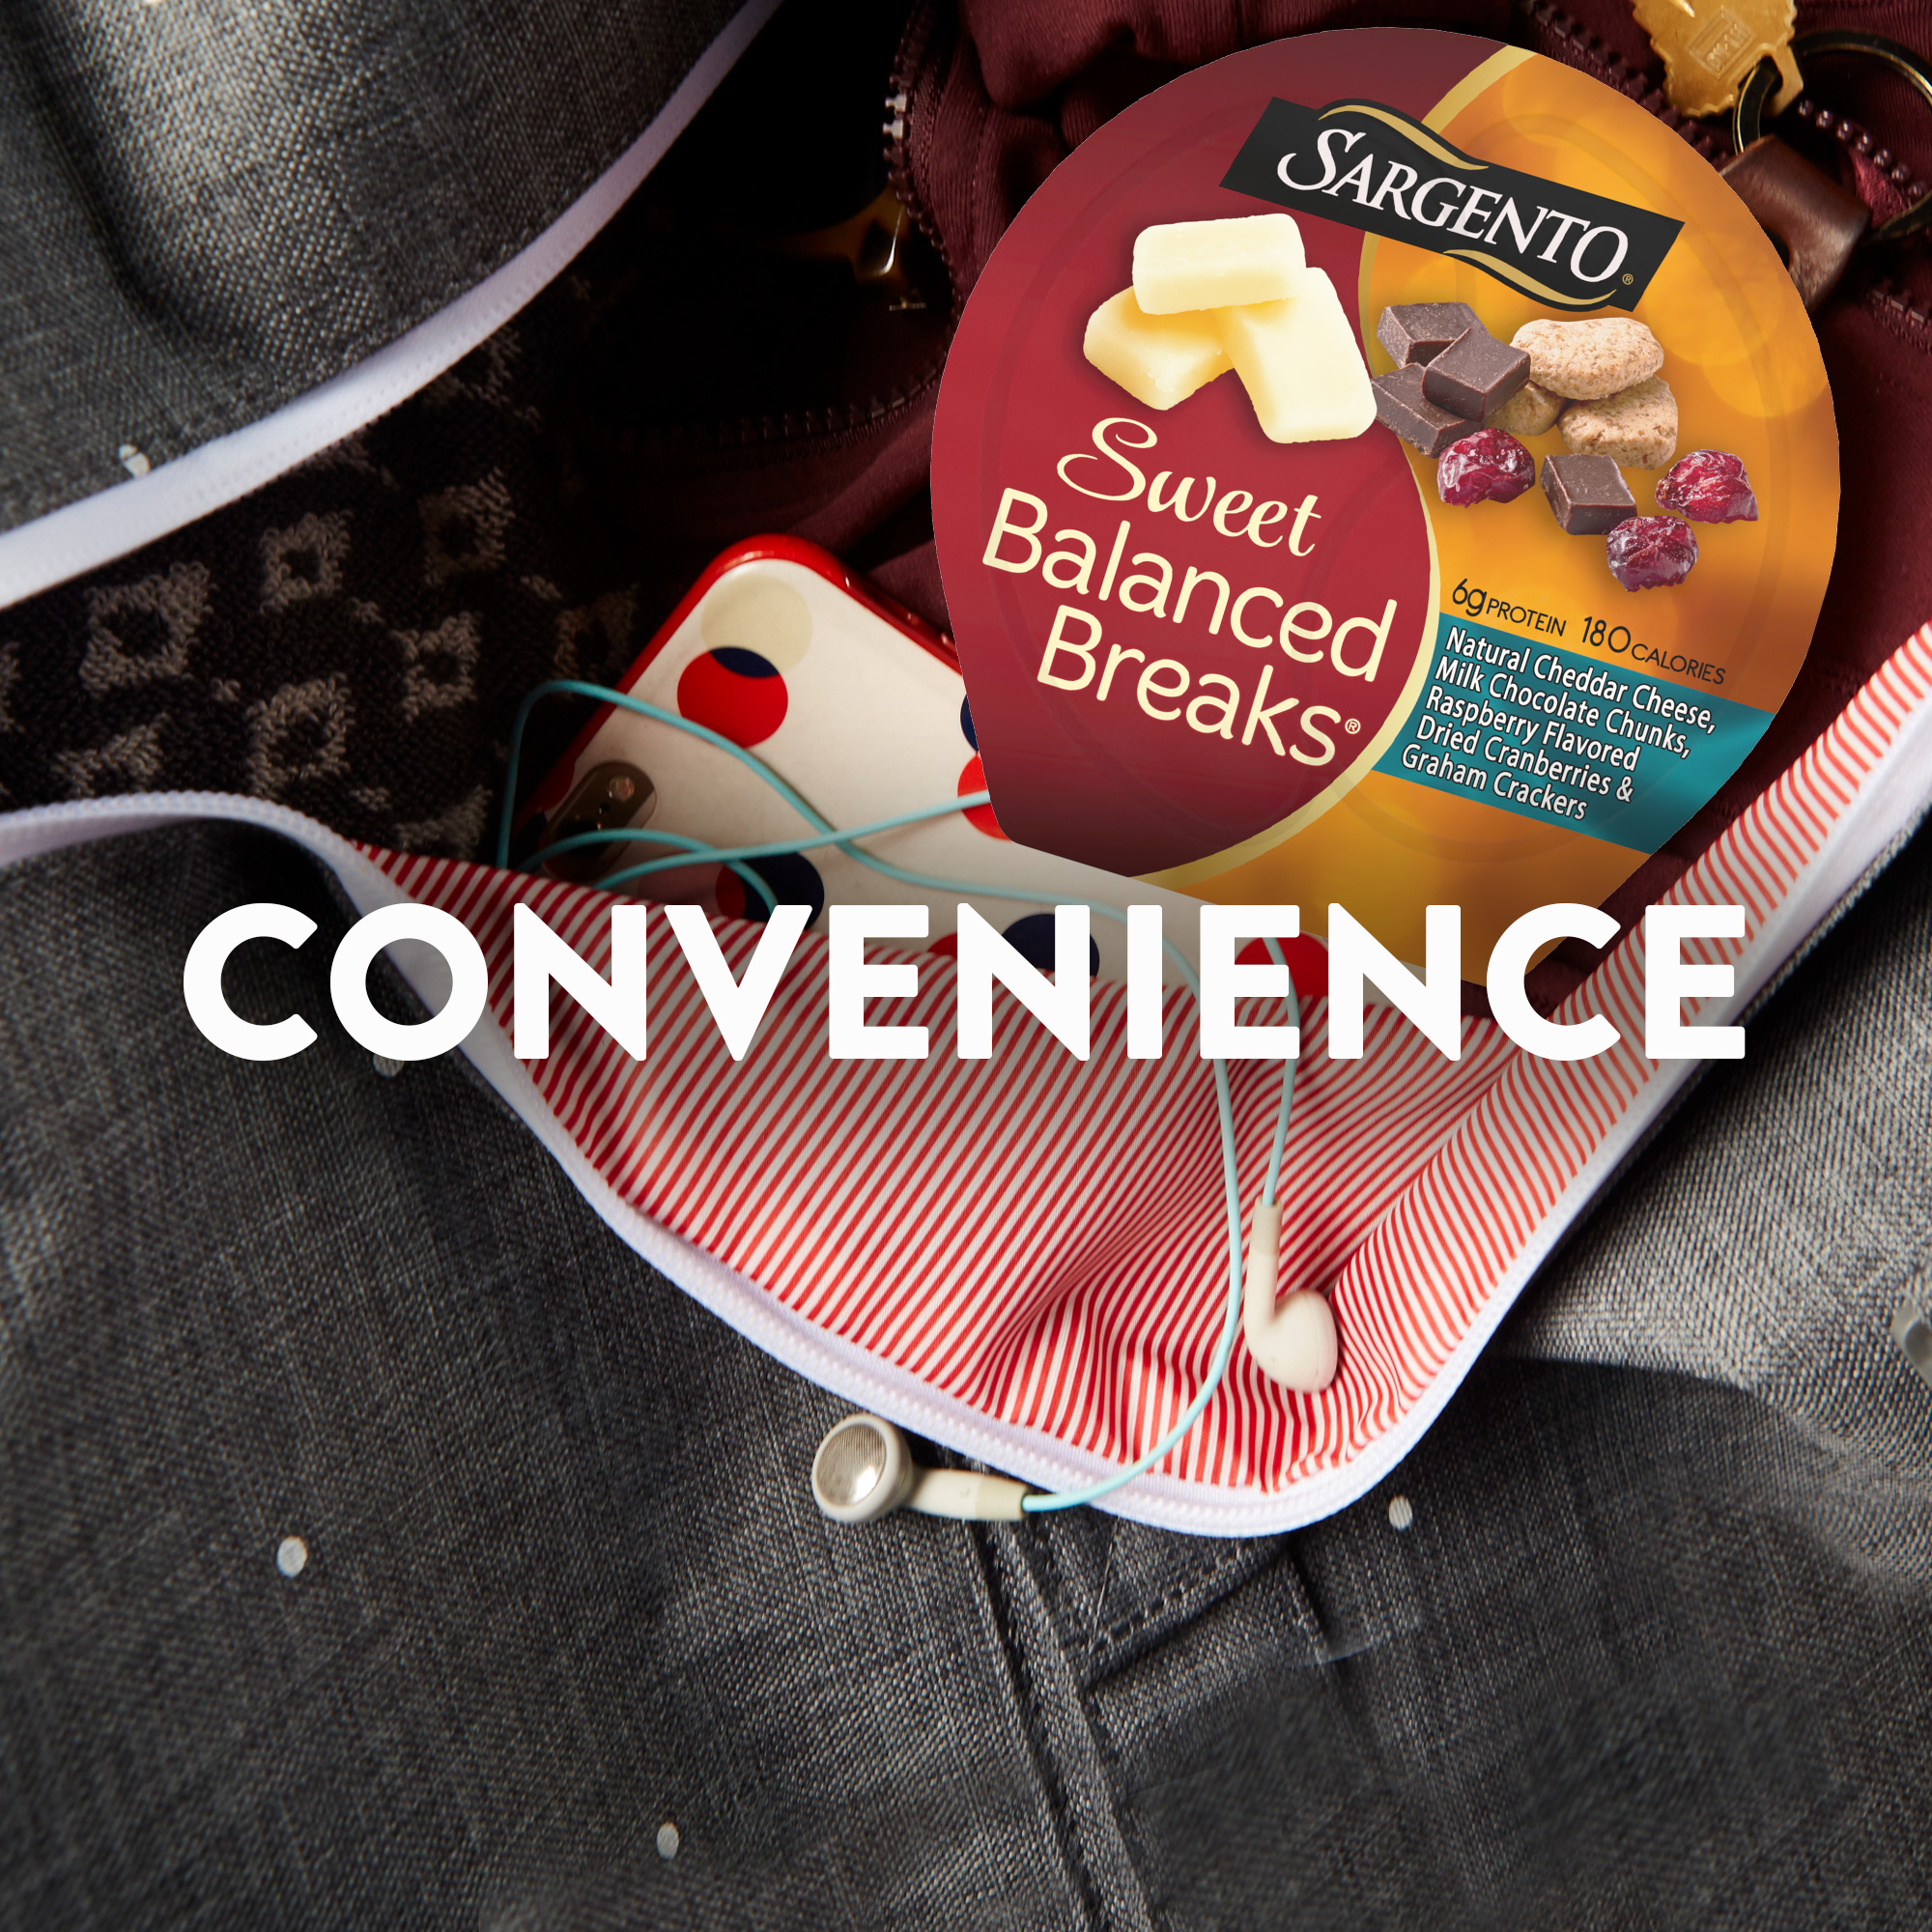 Sweet Balanced Breaks® Natural Cheddar Cheese with Chocolate Chunks, Raspberry Flavored Dried Cranberries and Graham Crackers